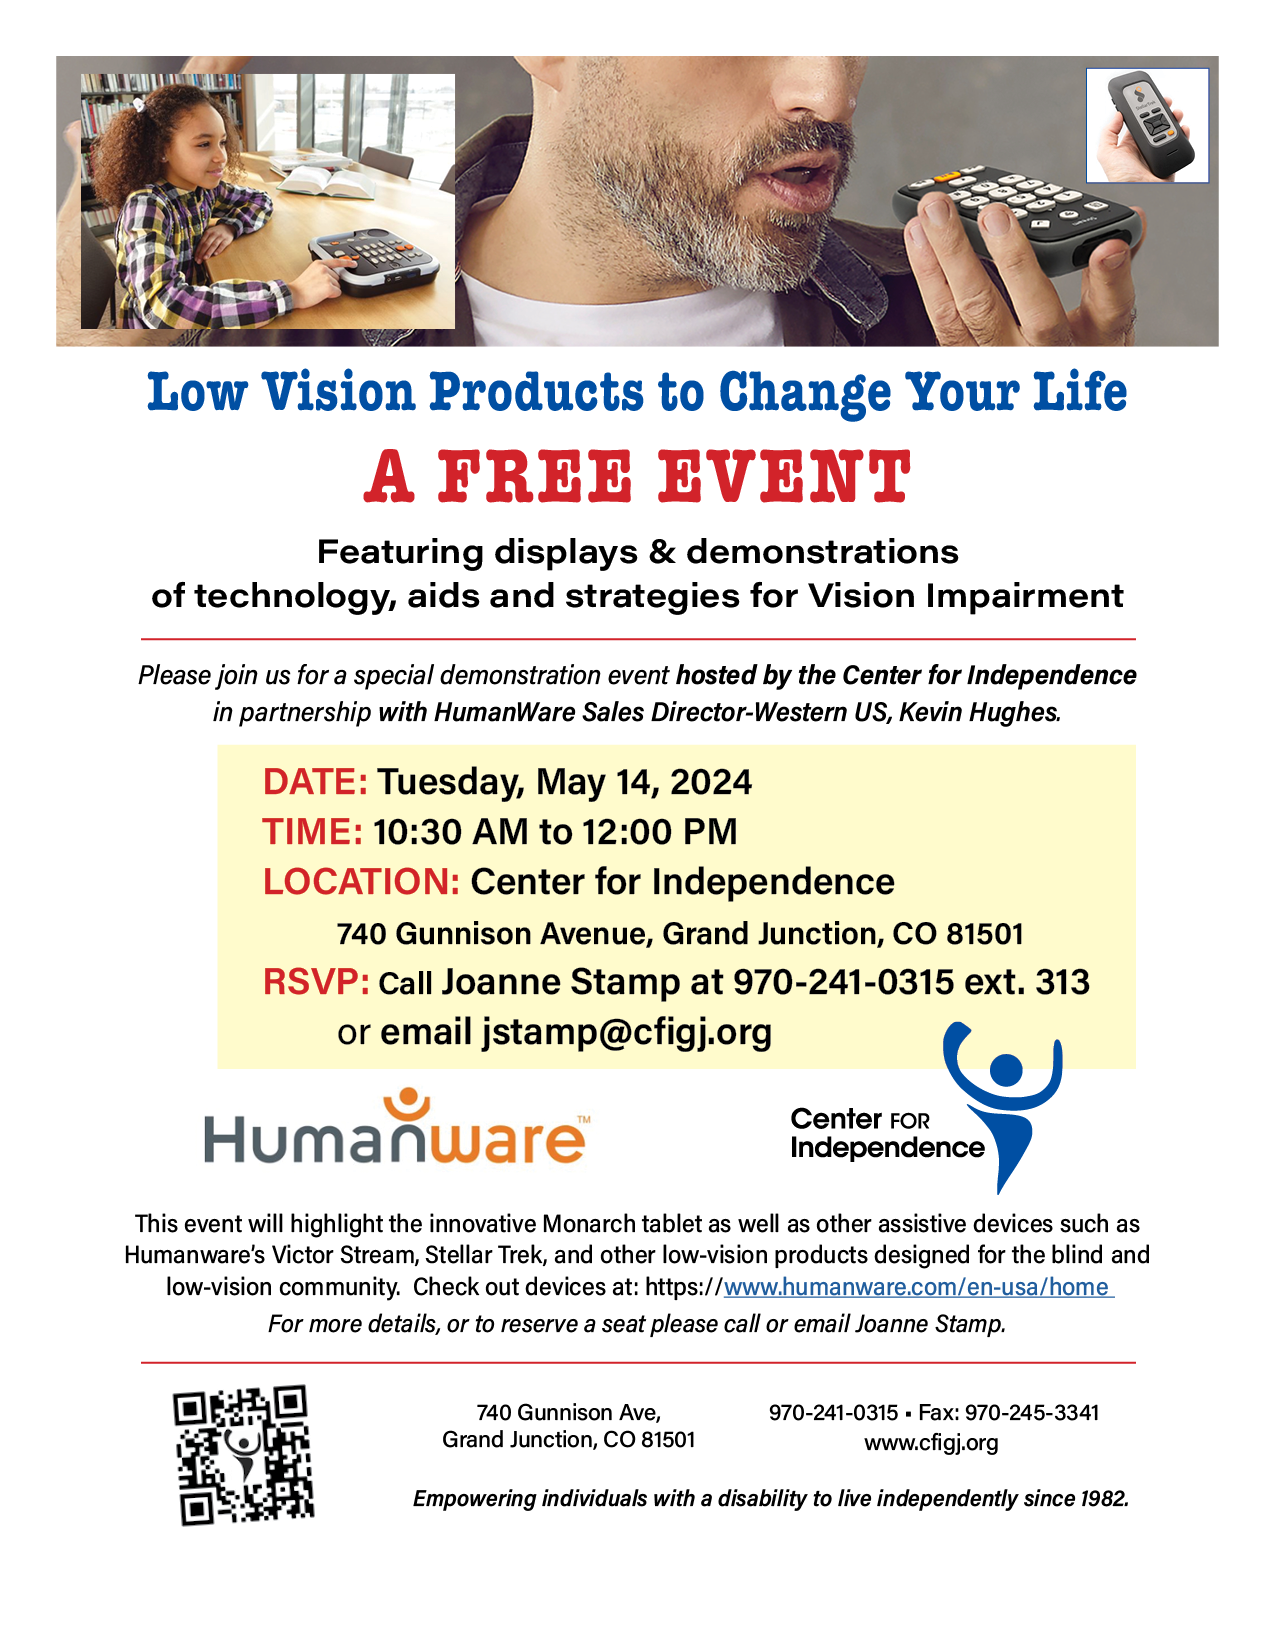 Low Vision Products to Change Your Life<br />
A FREE EVENT<br />
Featuring displays & demonstrations<br />
of technology, aids and strategies for Vision Impairment<br />
Tuesday, May 14, 2024<br />
10:30 AM to 12:00 PM<br />
Center for Independence